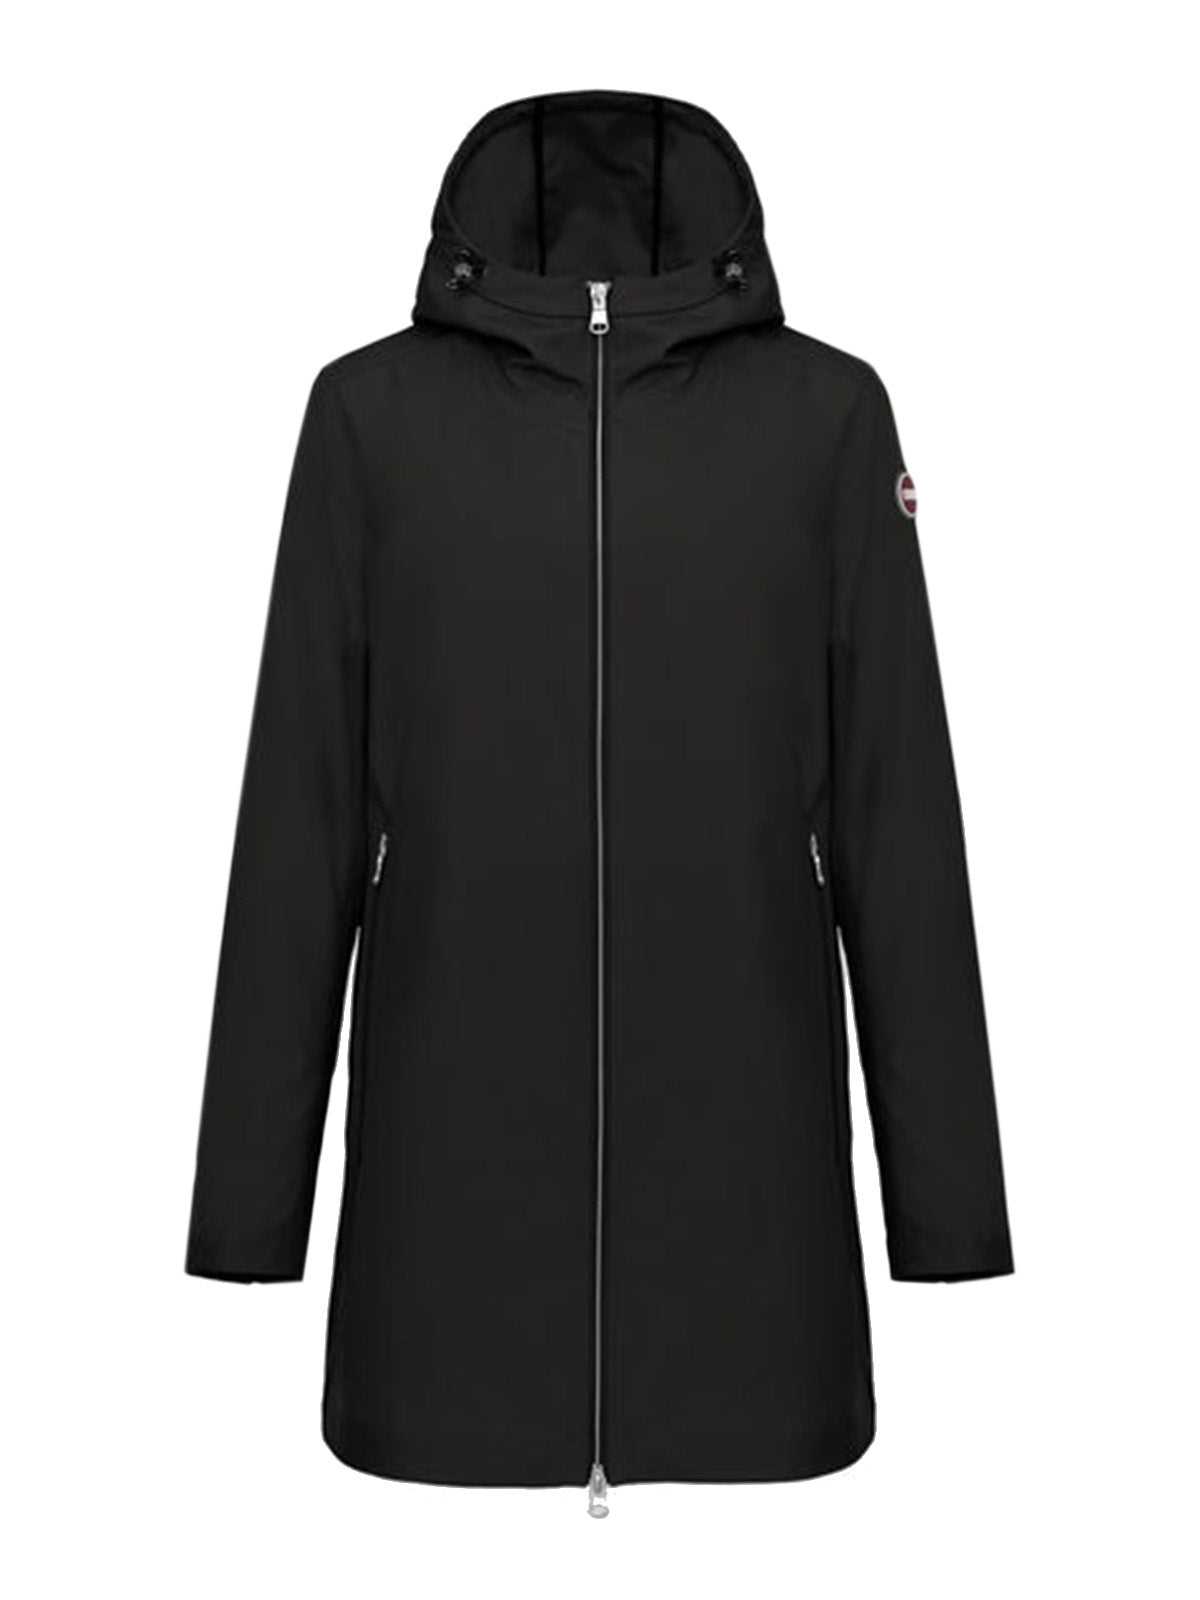 Giacche Donna Colmar - Giacca Lunga In Softshell - Nero